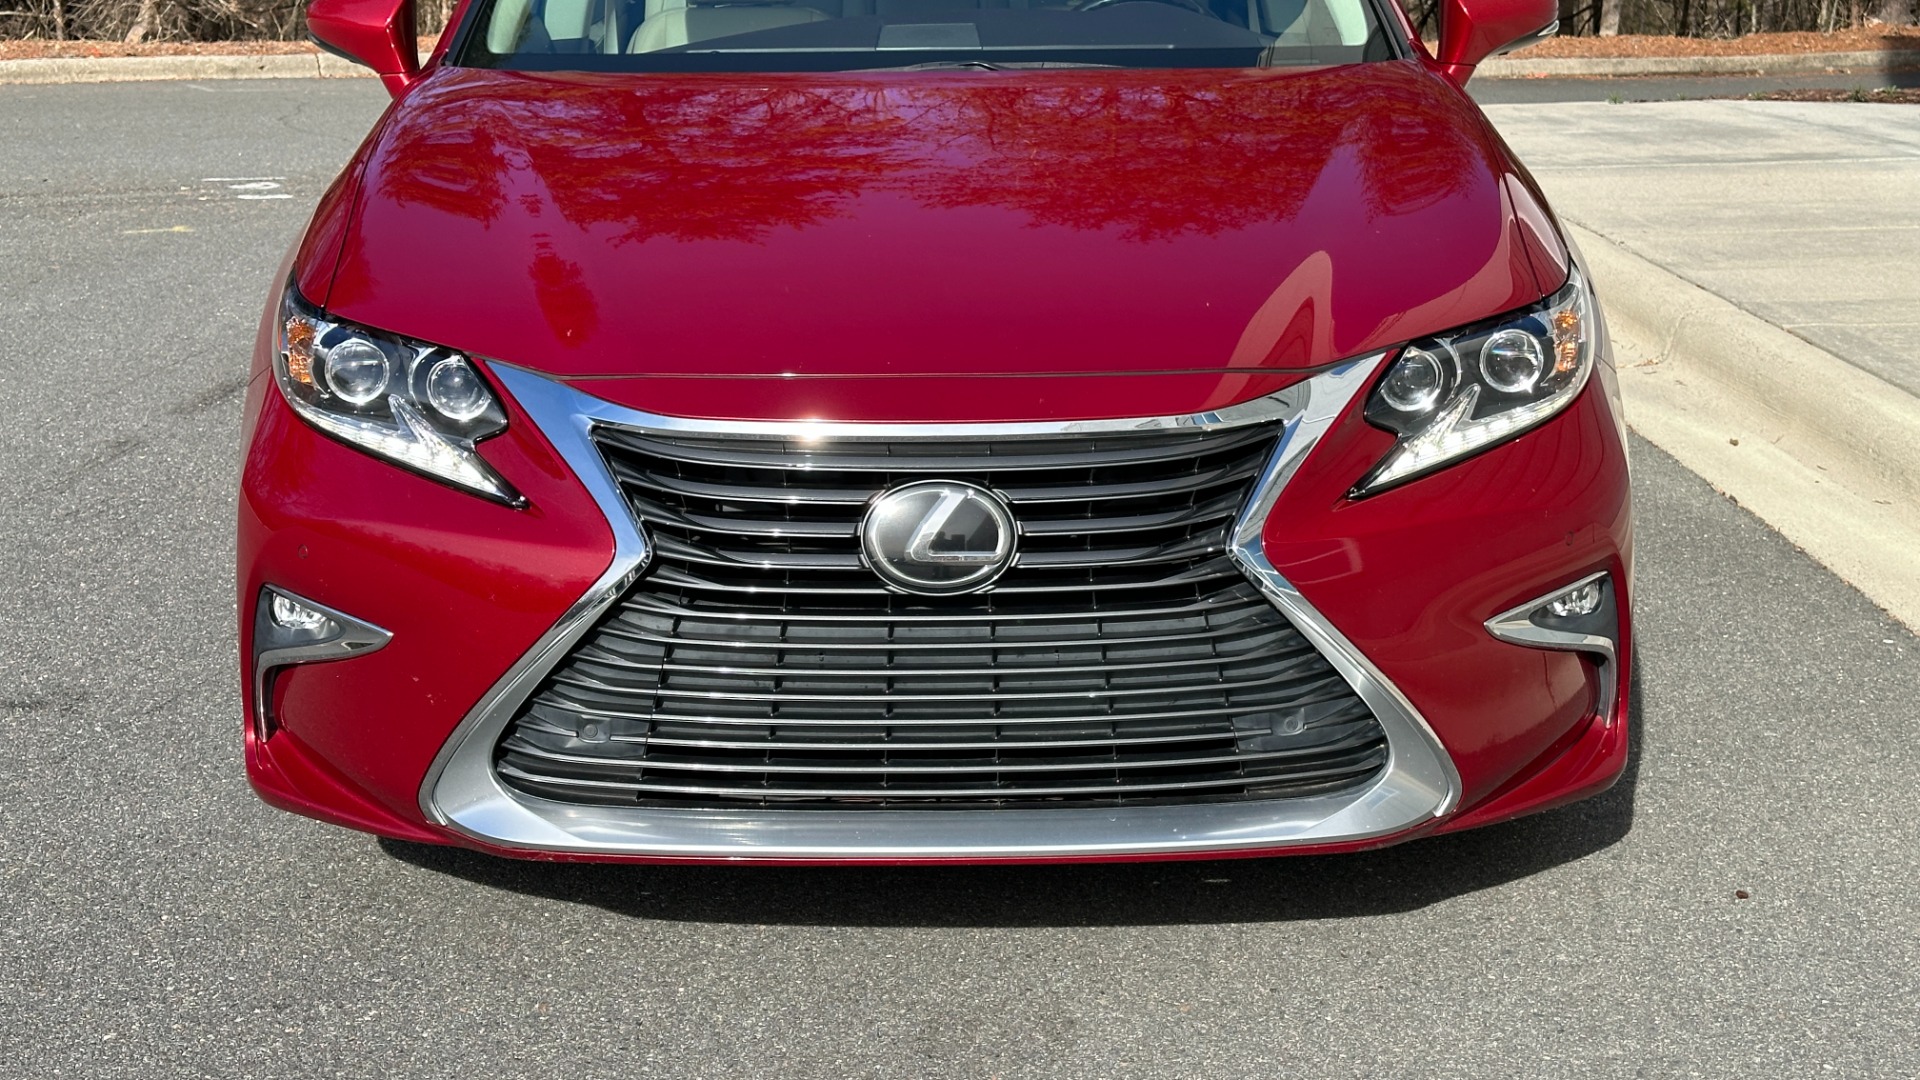 Used 2018 Lexus ES ES 350 / LUXURY PKG / PANORAMIC ROOF / NAV PACKAGE / LED LIGHTS for sale $24,595 at Formula Imports in Charlotte NC 28227 8